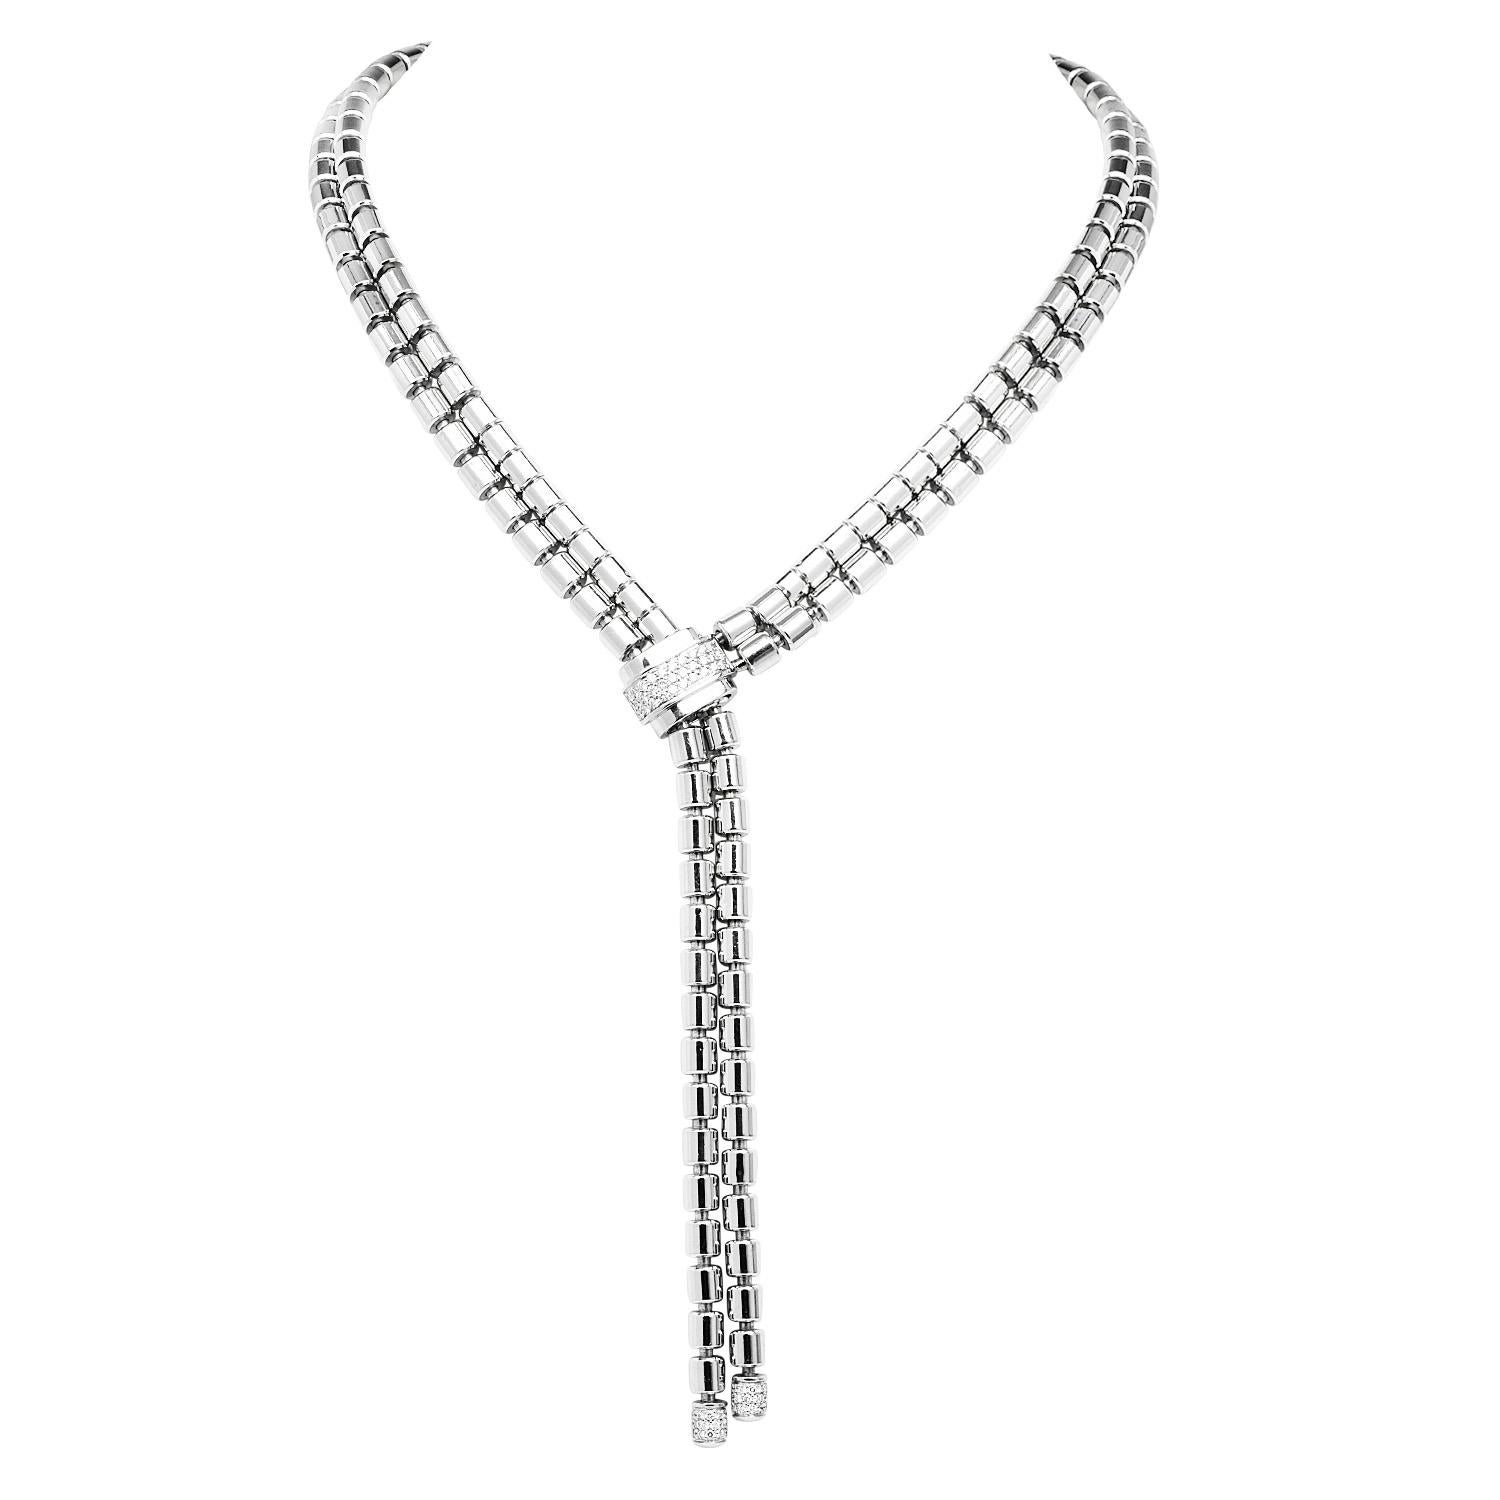 From the Piaget world with LOVE! T^his is a double bandeau necklace from their iconic 'Possession' Collection.
This piece features two flexible cylinder link chains connected by a diamond set in a fold-over locking clasp.
The Clasp & Lariat Style